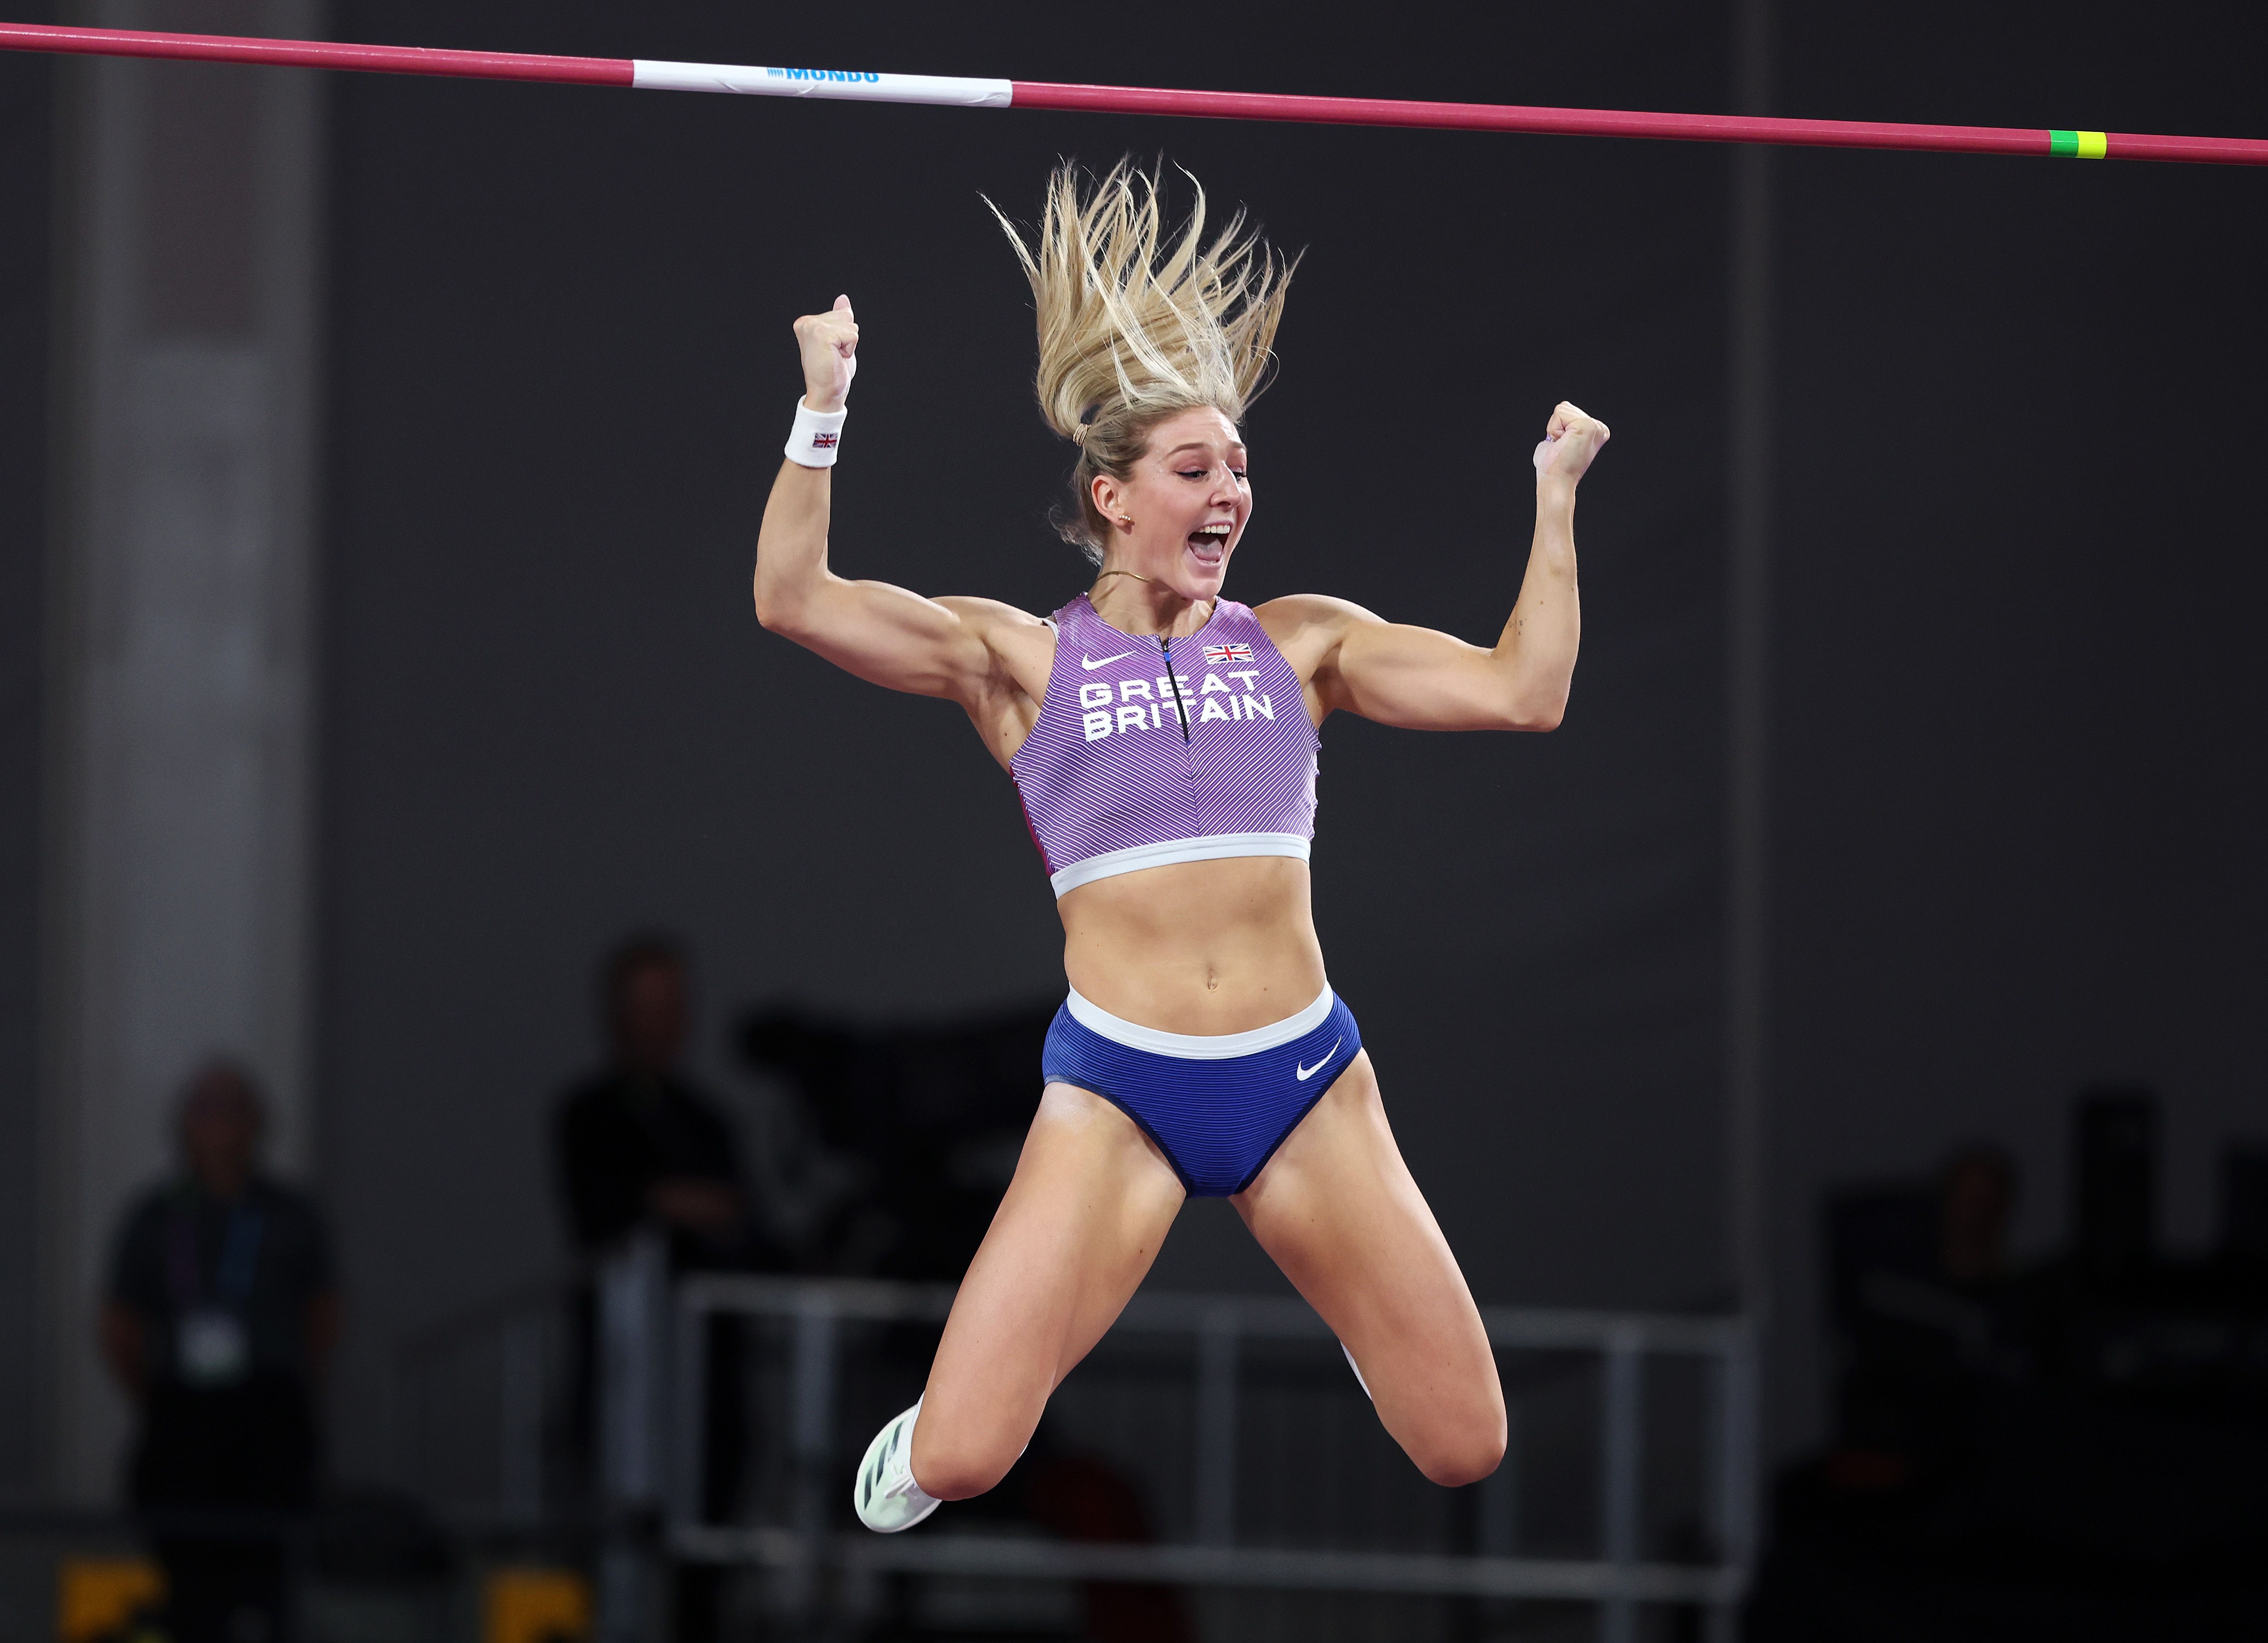 Molly Caudery, winner of the pole vault at the World Athletics Indoor Championships Glasgow 24